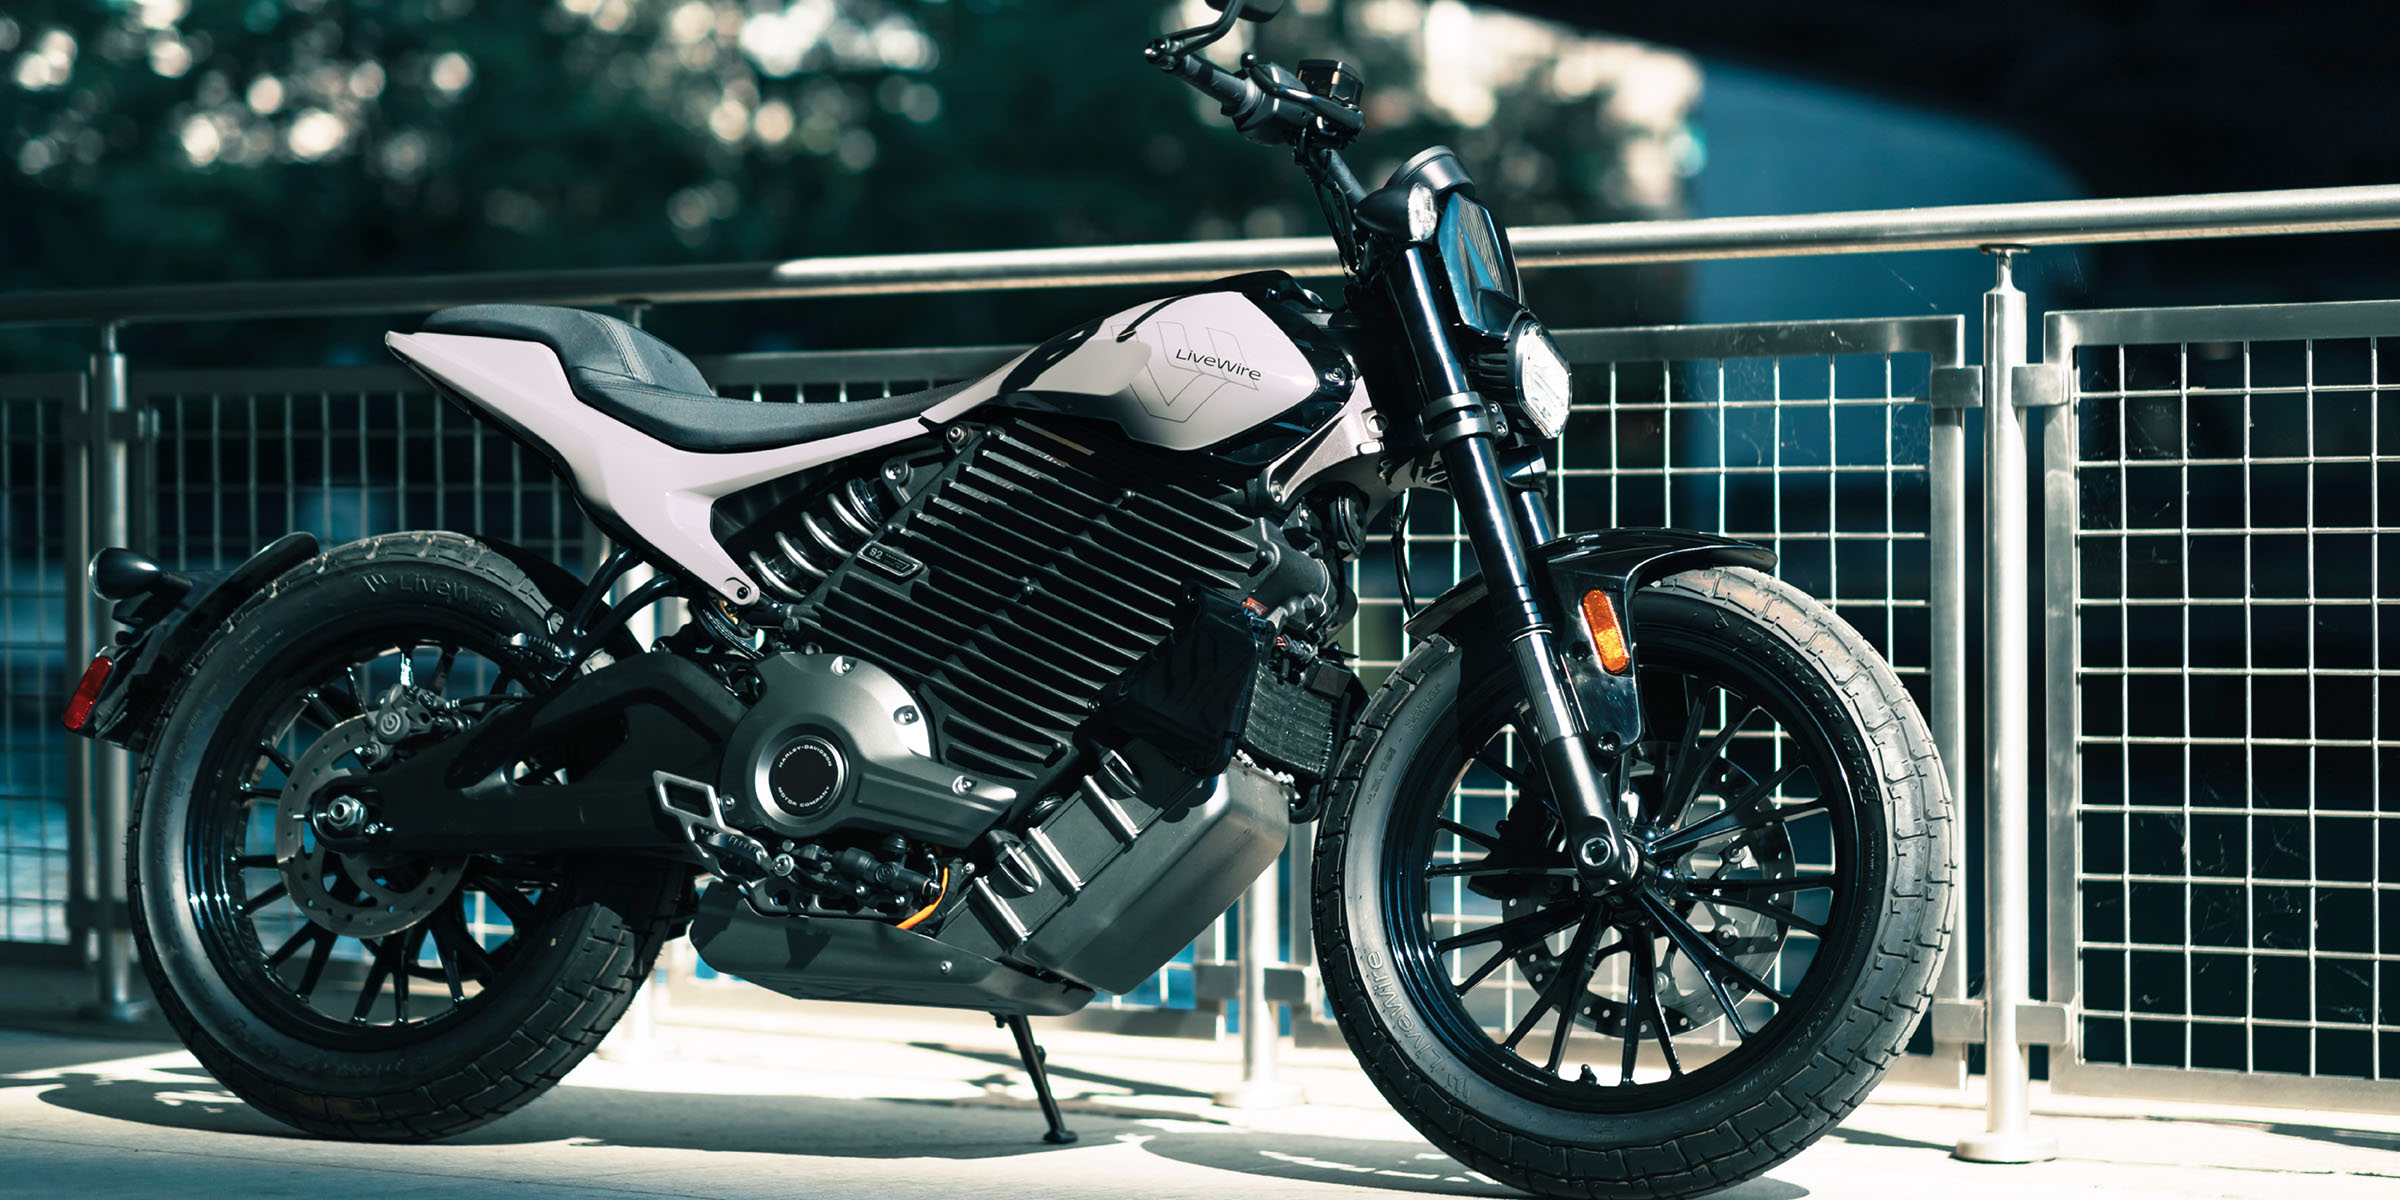 LiveWire™ Readies Latest S2 Del Mar™ Electric Motorcycle